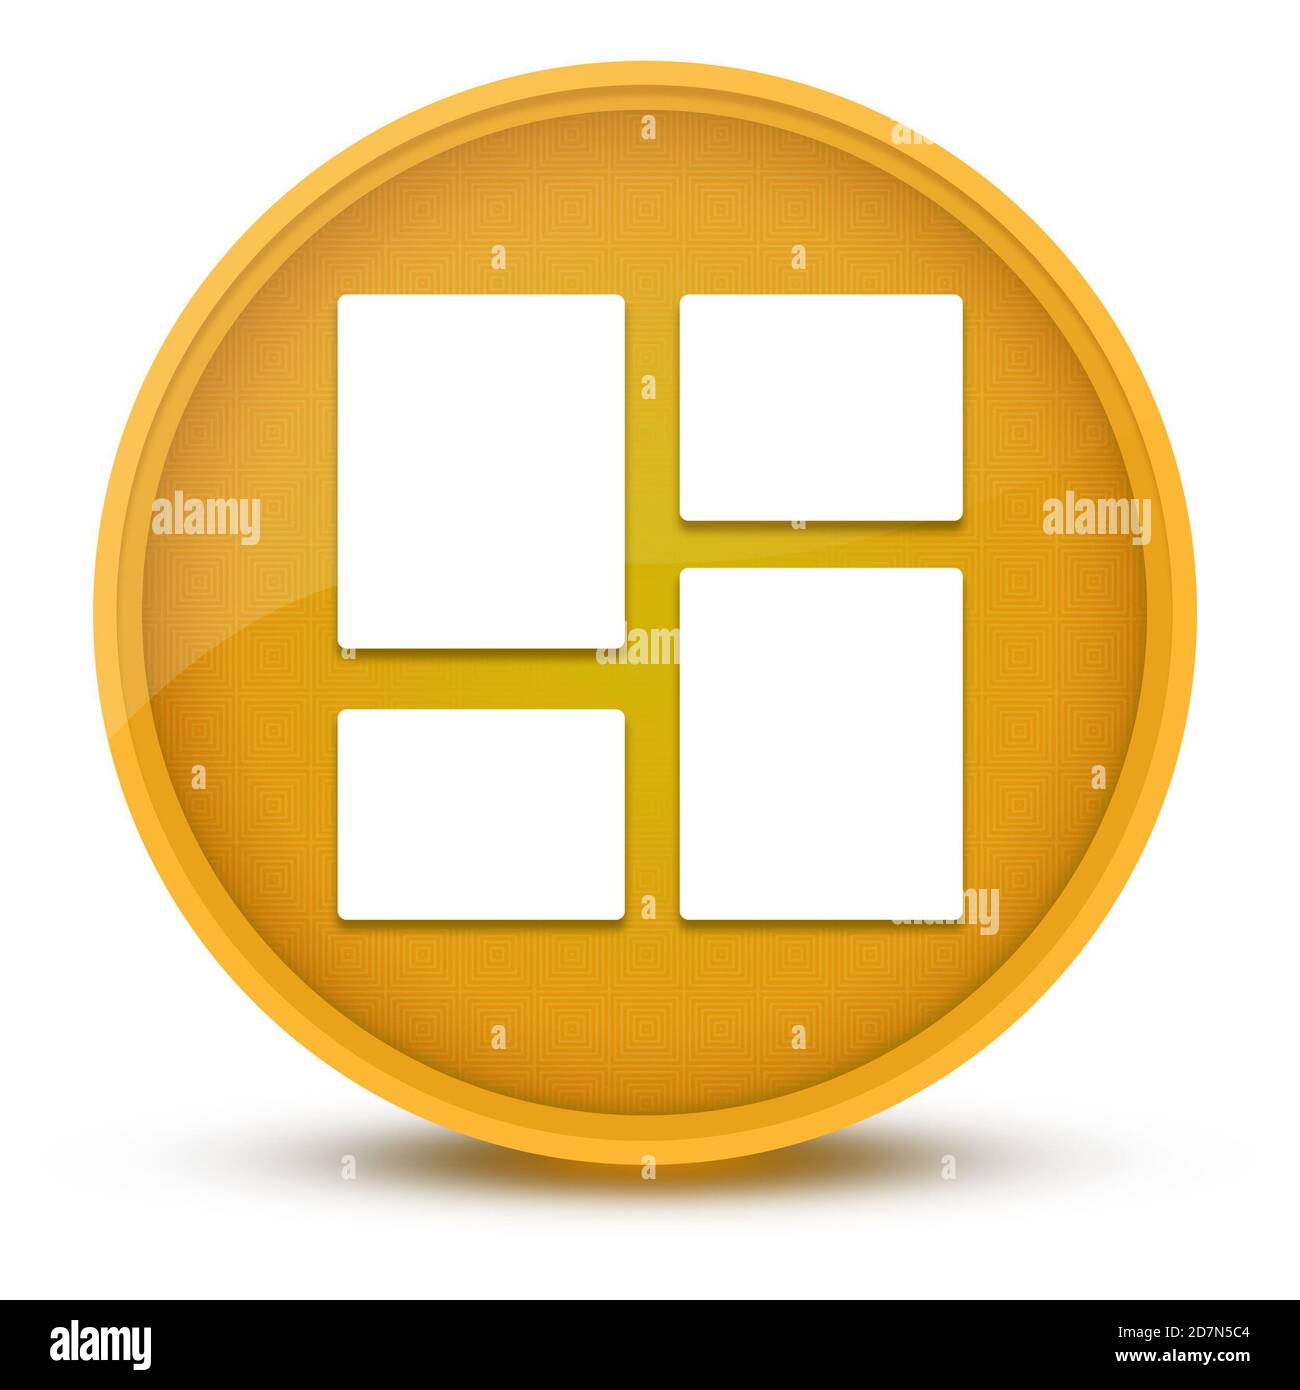 Music Luxurious Glossy Yellow Round Button Abstract Stock